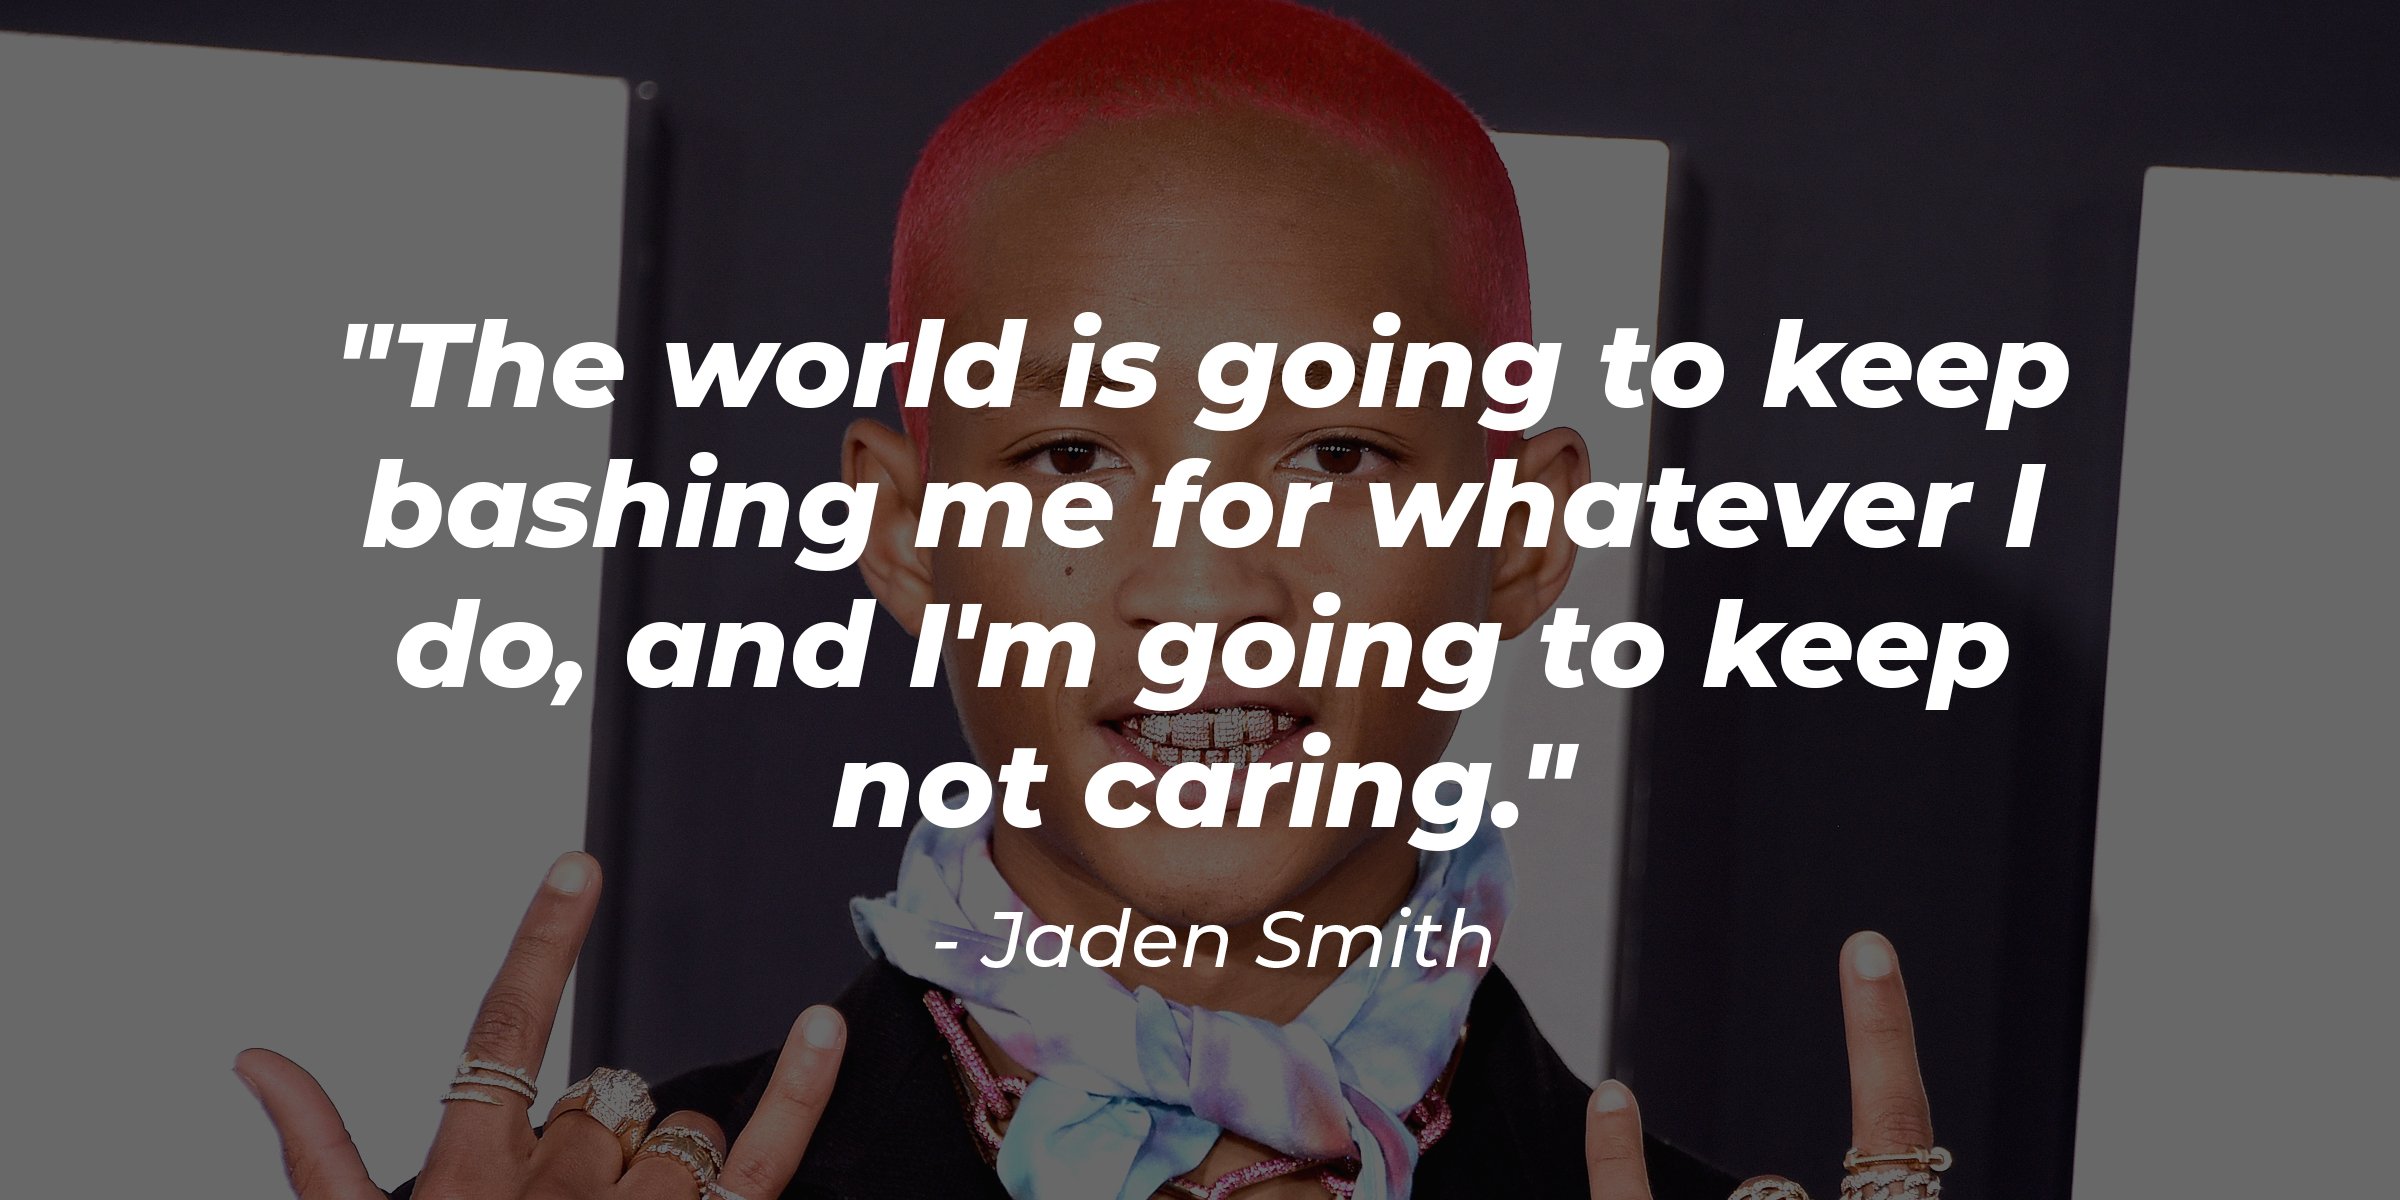 Source: Getty Images | Jaden Smith with his quote "The world is going to keep bashing me for whatever I do, and I'm going to keep not caring."